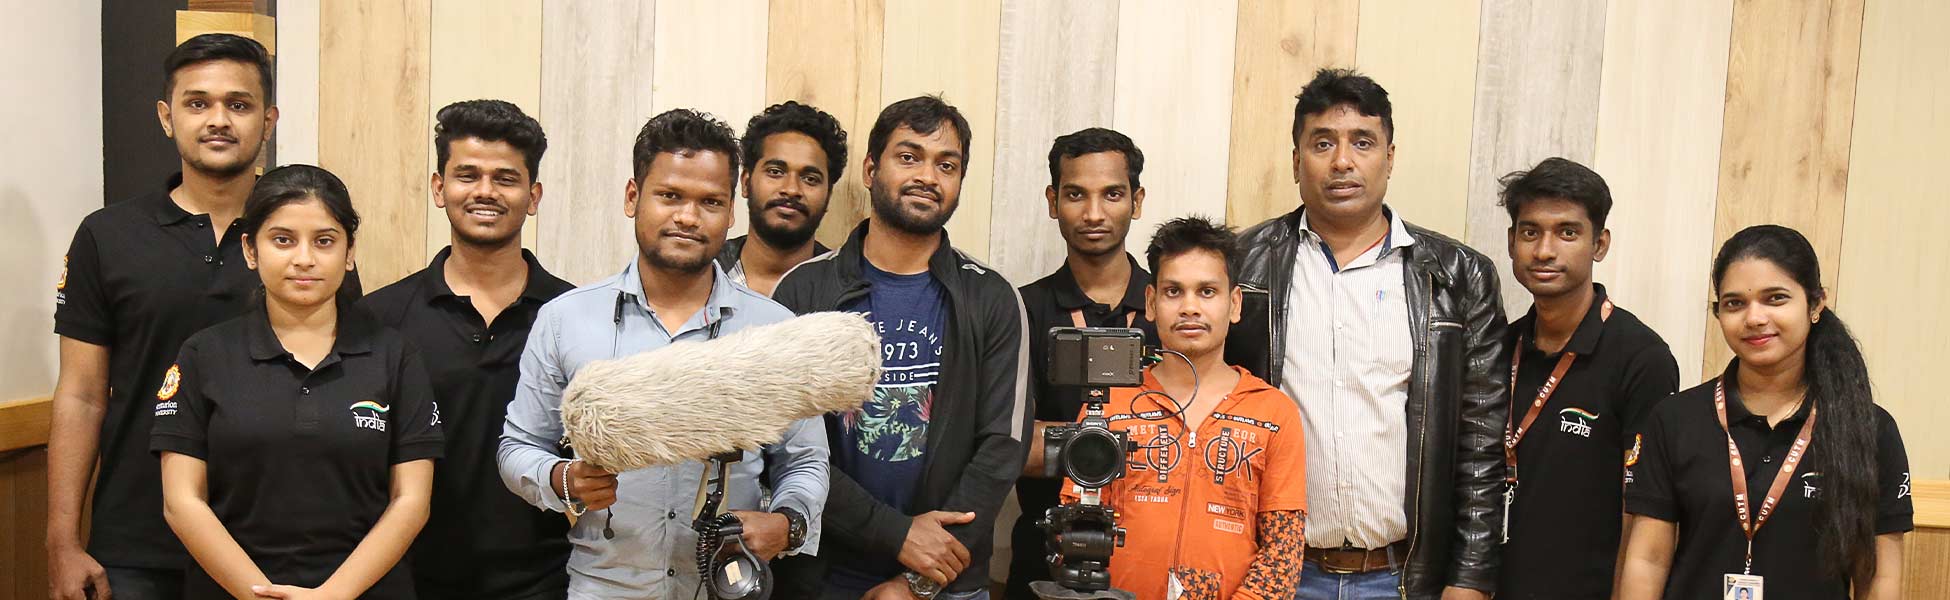 film production services in Sindhudurg, video production services in Sindhudurg, tv production services in Sindhudurg, production services in Sindhudurg